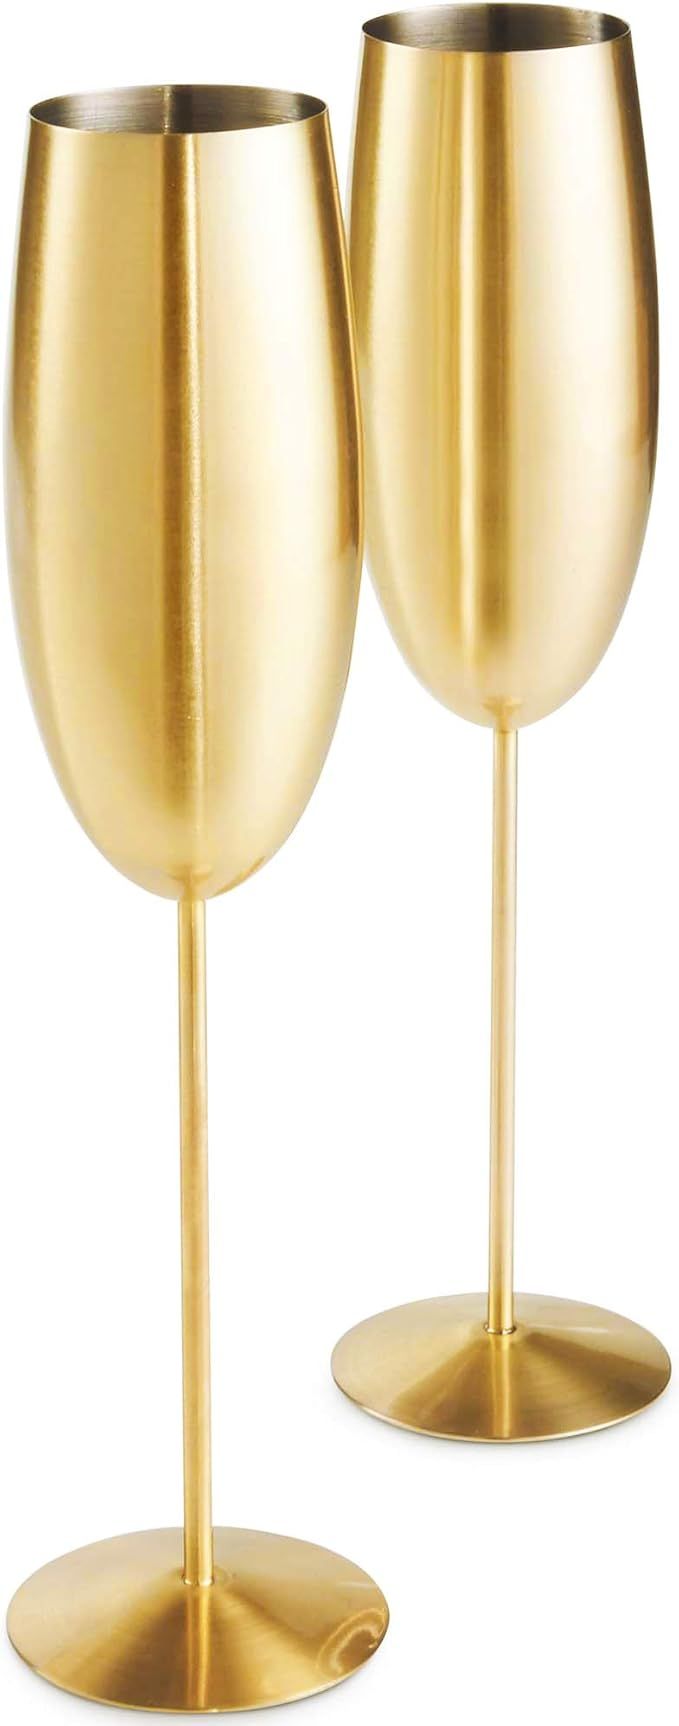 VonShef Champagne Flutes, Set of 2 Brushed Gold Prosecco Glasses w/Gift Box, Stainless Steel Shat... | Amazon (US)